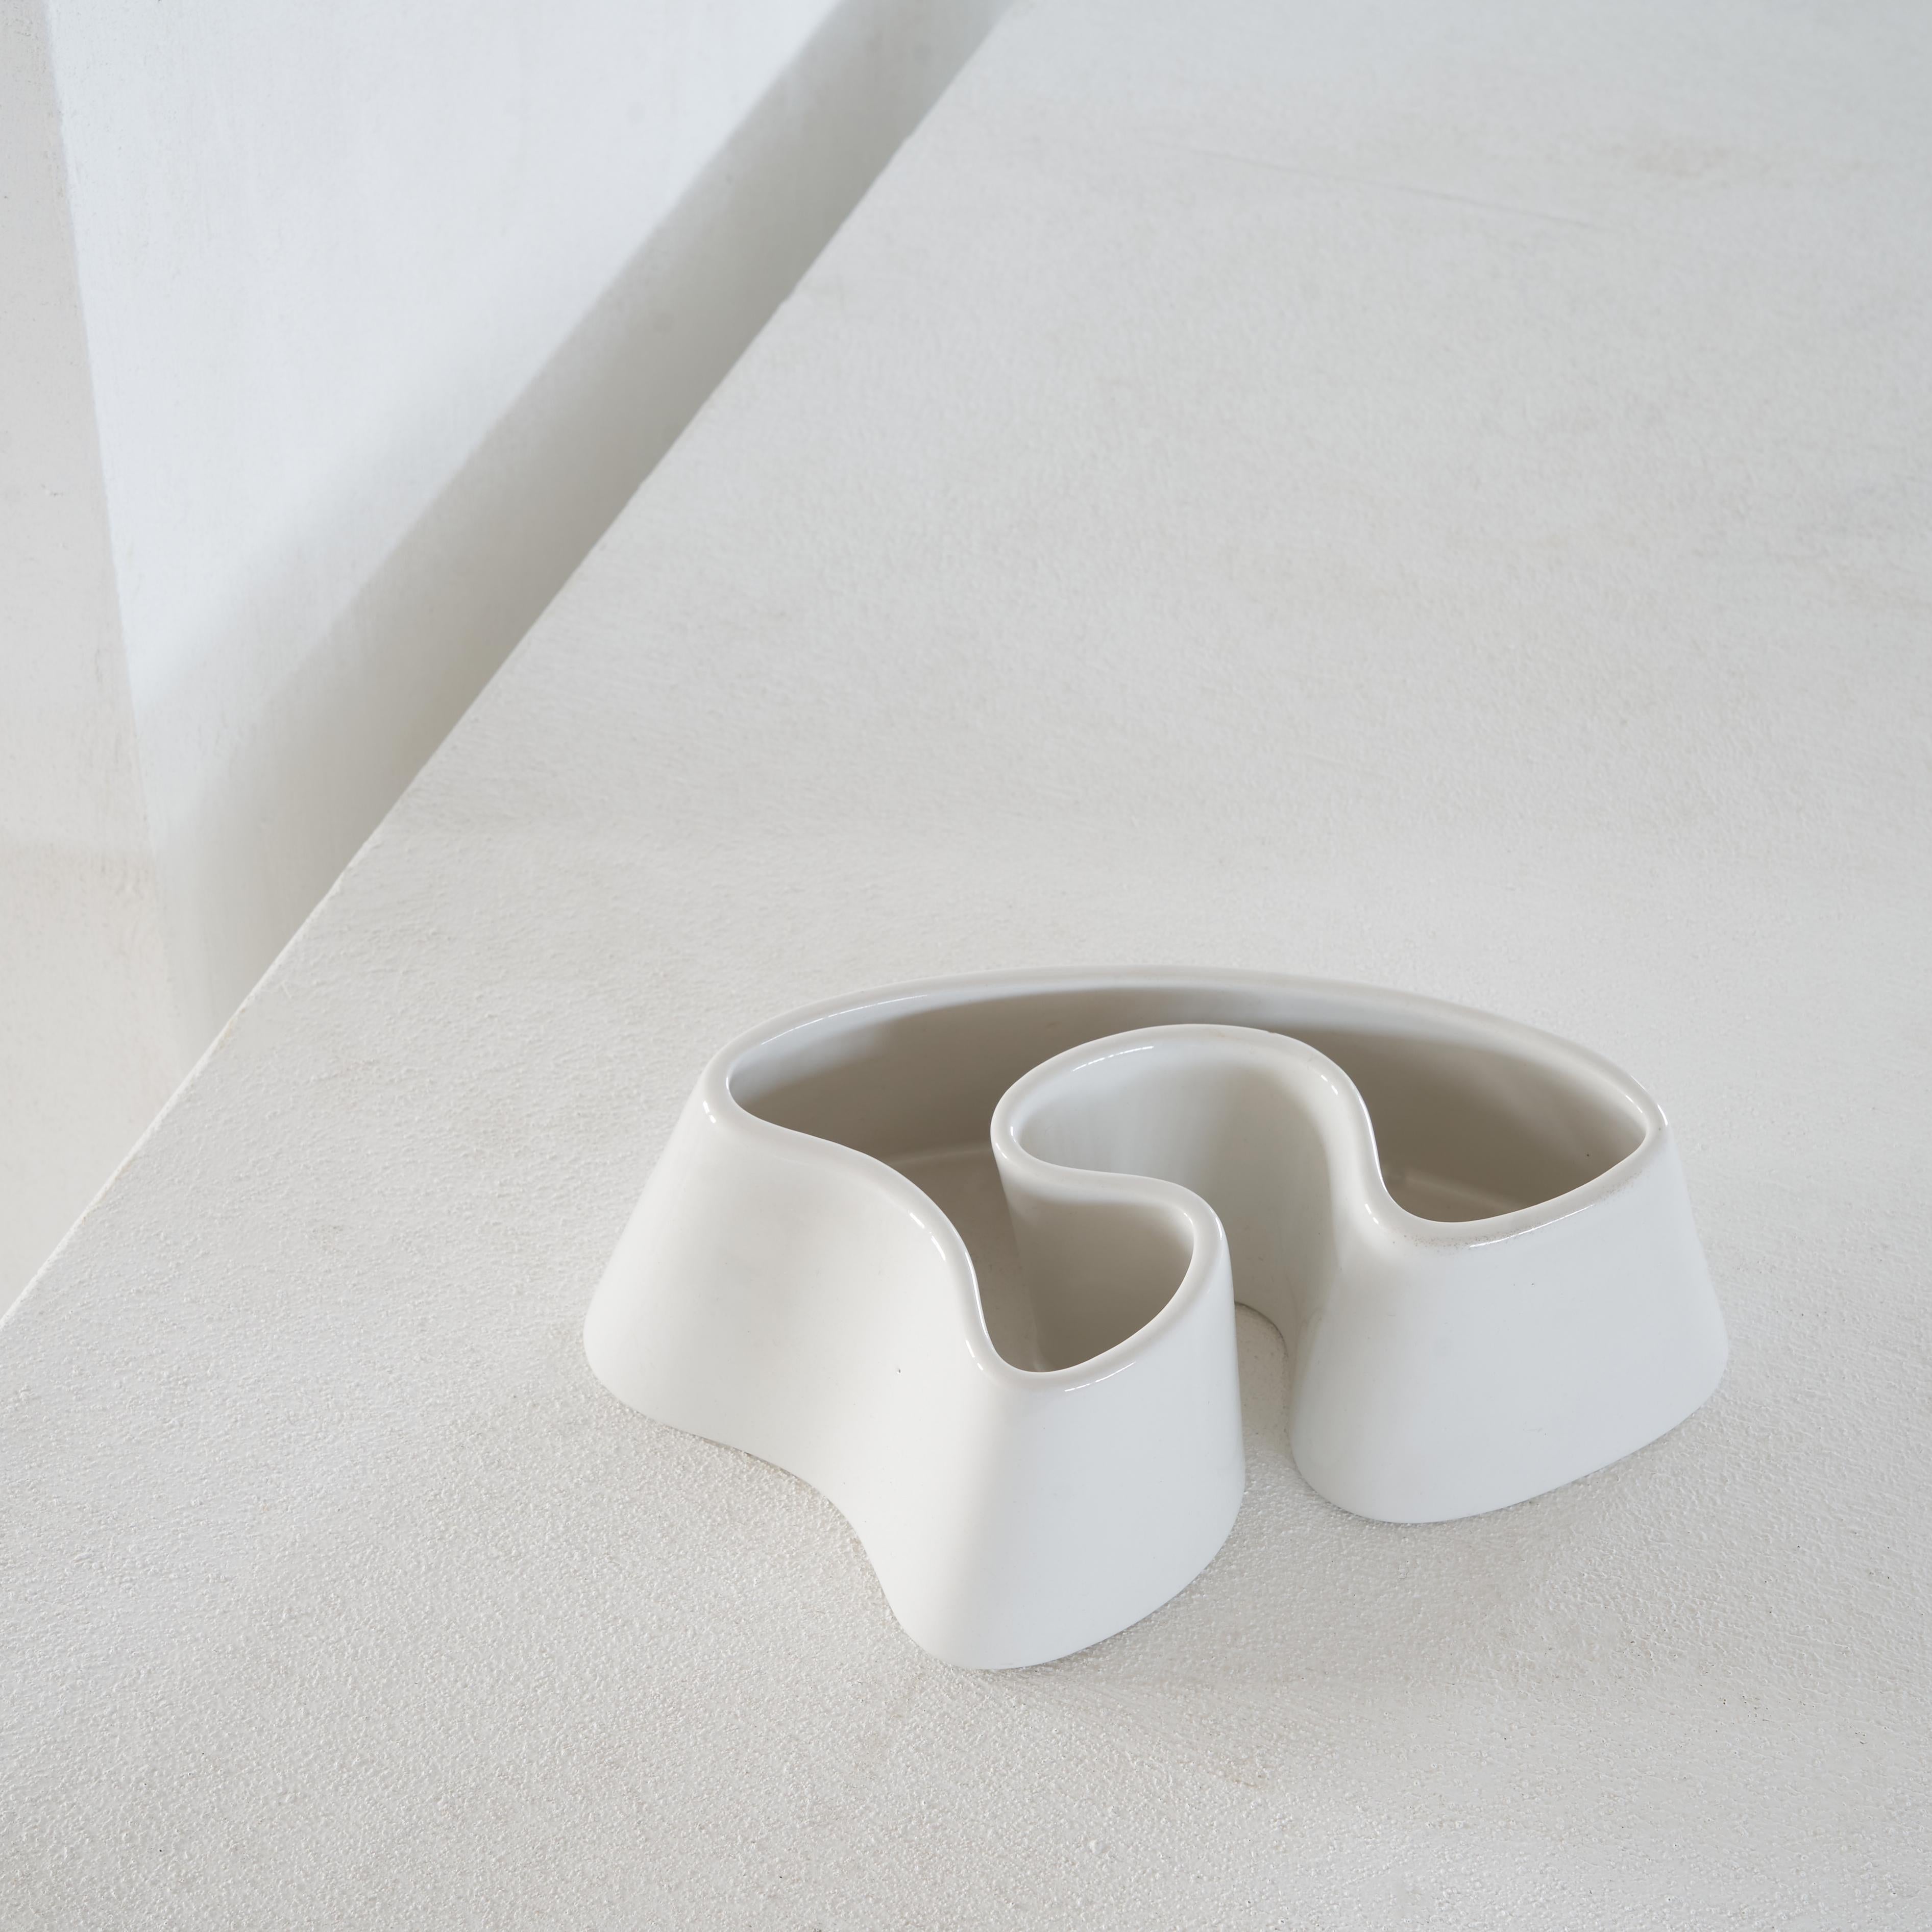 Great avant garde ceramic object by Angelo Mangiarotti (1921 – 2012) for Danese Milano. 1964.

This is an object out of the series ‘Tremiti Formalibera’. The shapes of this Mangiarotti design show a great dynamic and the flowing lines make this a